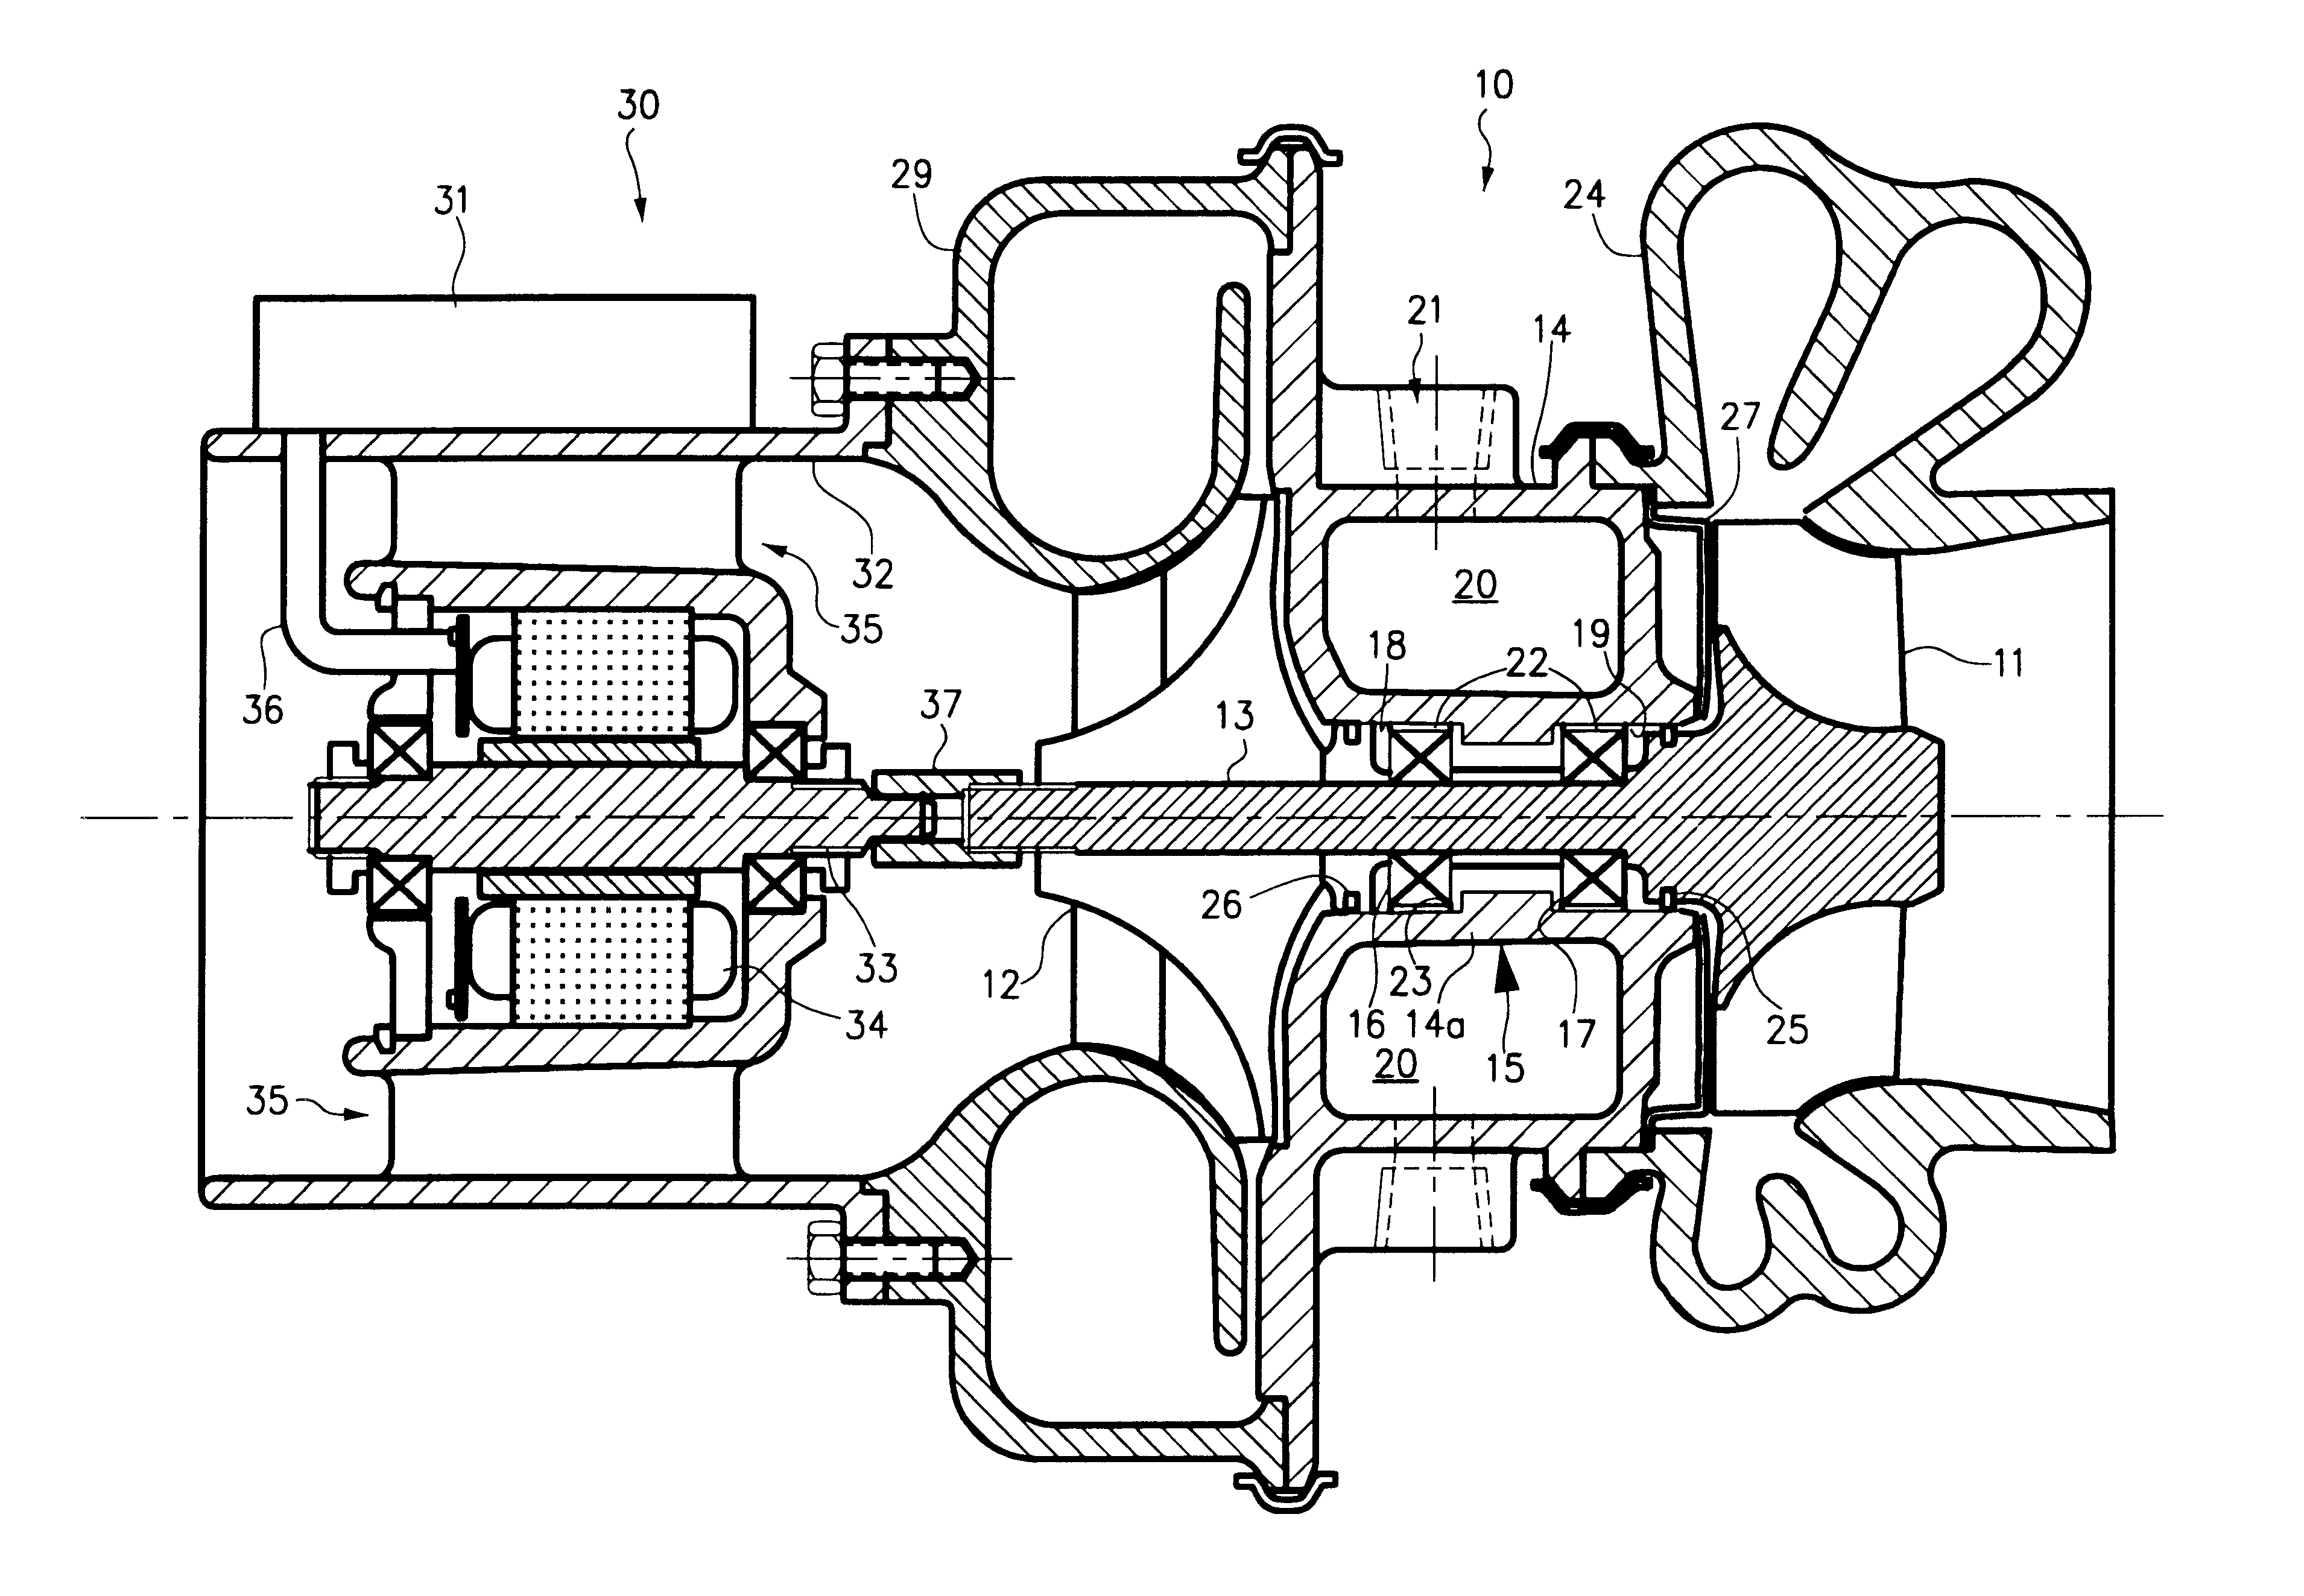 Compact turbocharger